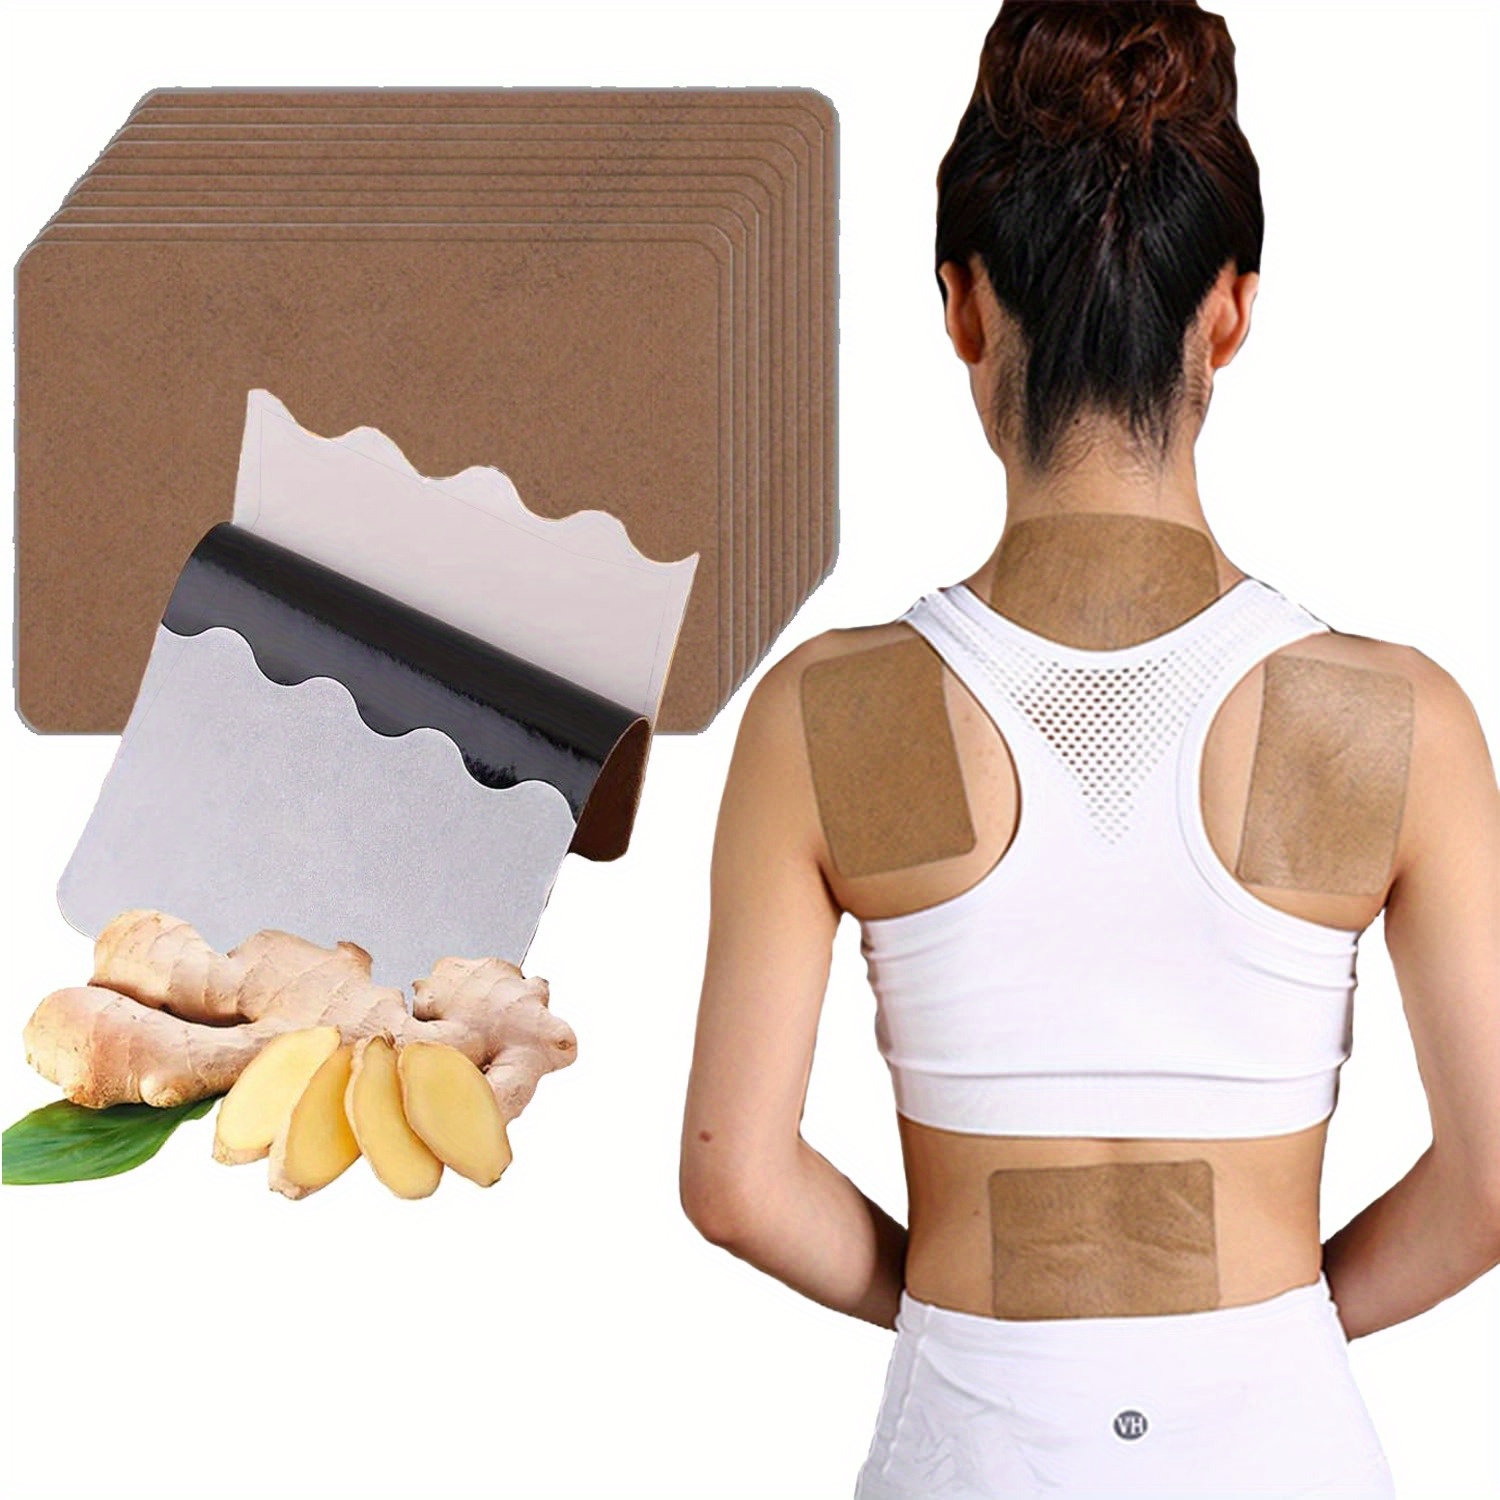 

40/80pcs Self-heating Ginger Heat Patch,natural Heating Pads, Helps The Body To Generate Heat, For Shoulder, Neck, Hand, Back, Feet, Knee